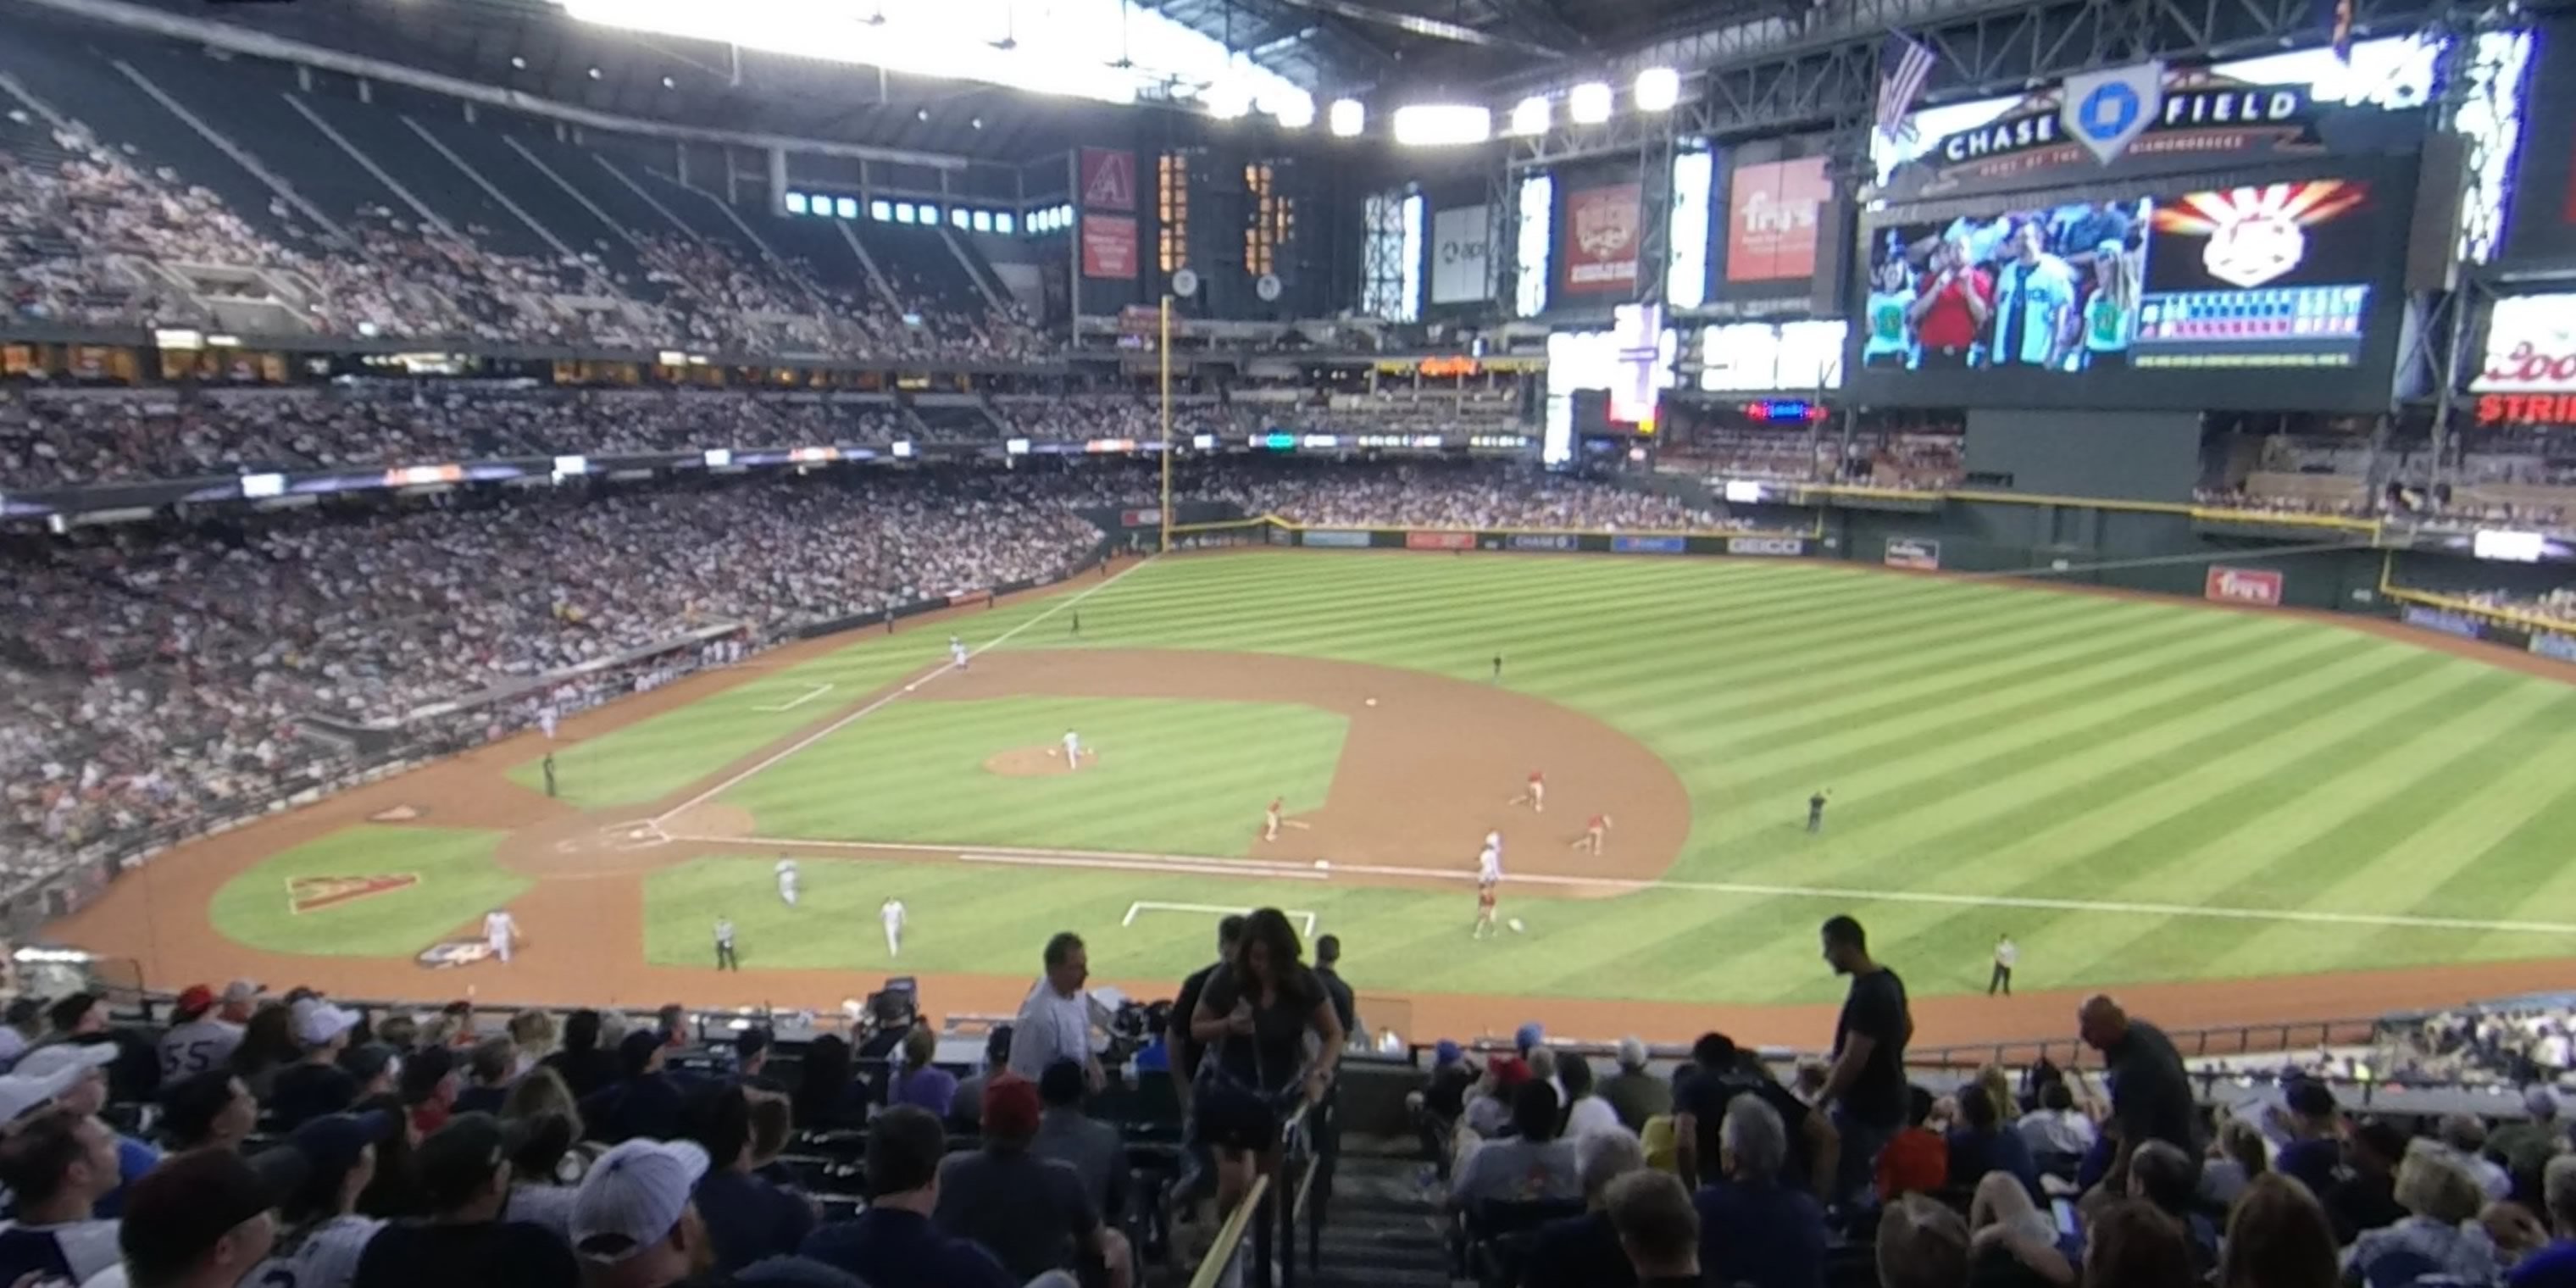 section 207 panoramic seat view  for baseball - chase field